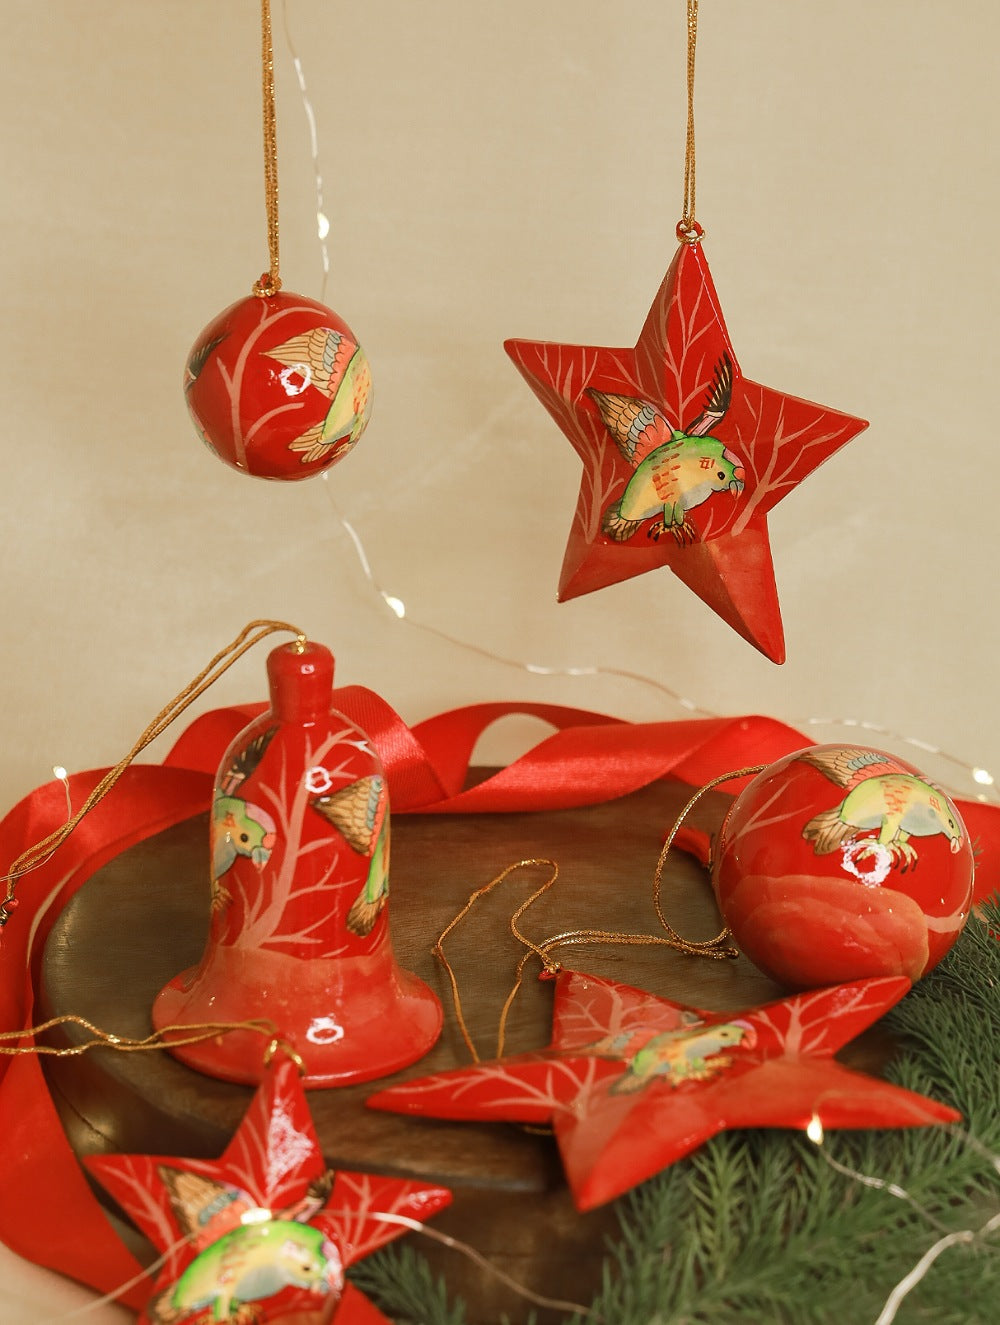 Load image into Gallery viewer, Kashmiri Art Xmas Decorations - Set of 6 (3 Stars, 2 Baubles &amp; 1 Bell)